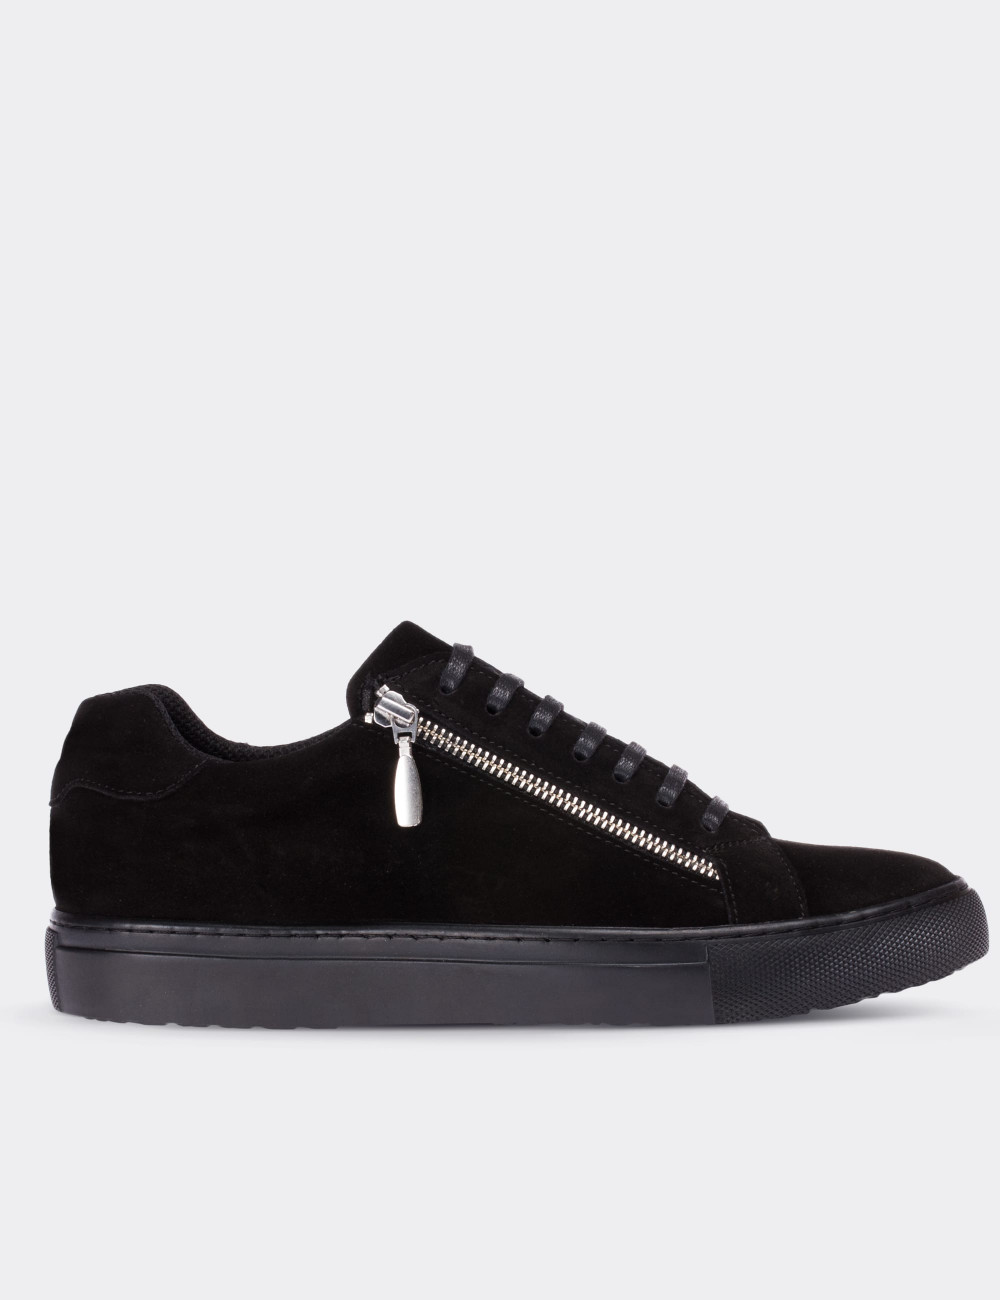 Black Suede Leather Sneakers - 01741MSYHC01